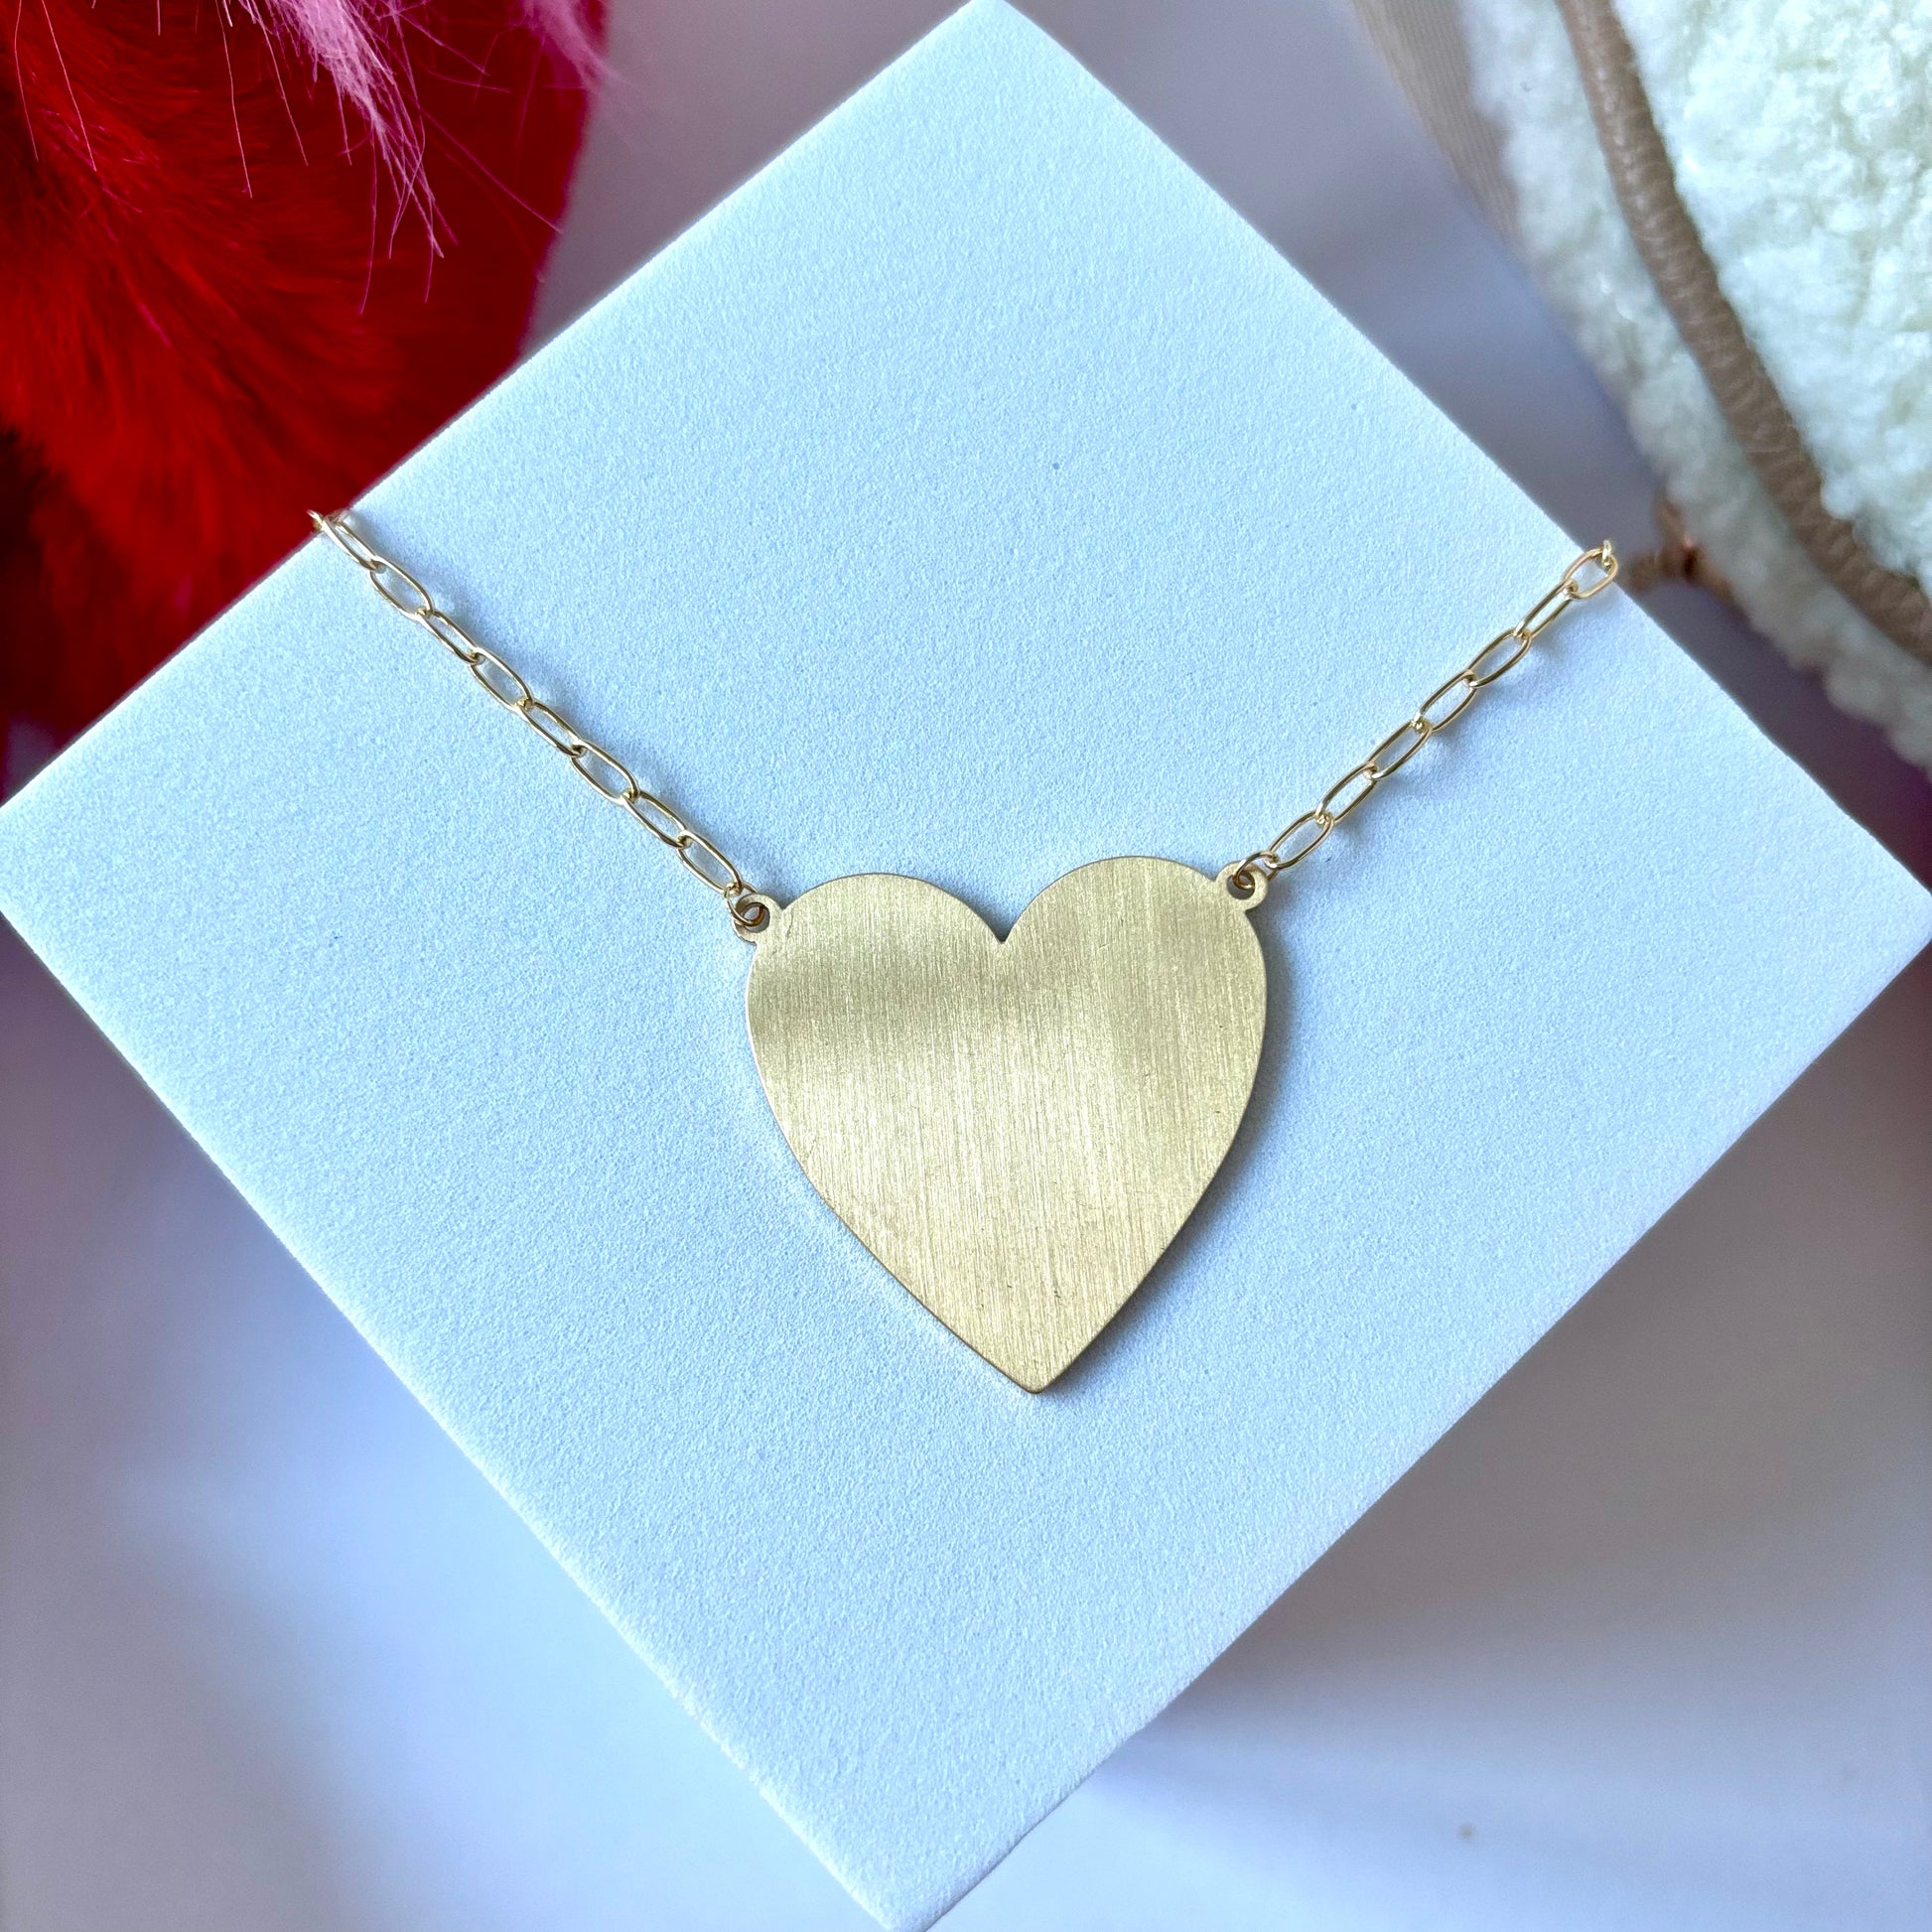 Oversized gold heart pendant necklace on linked chain